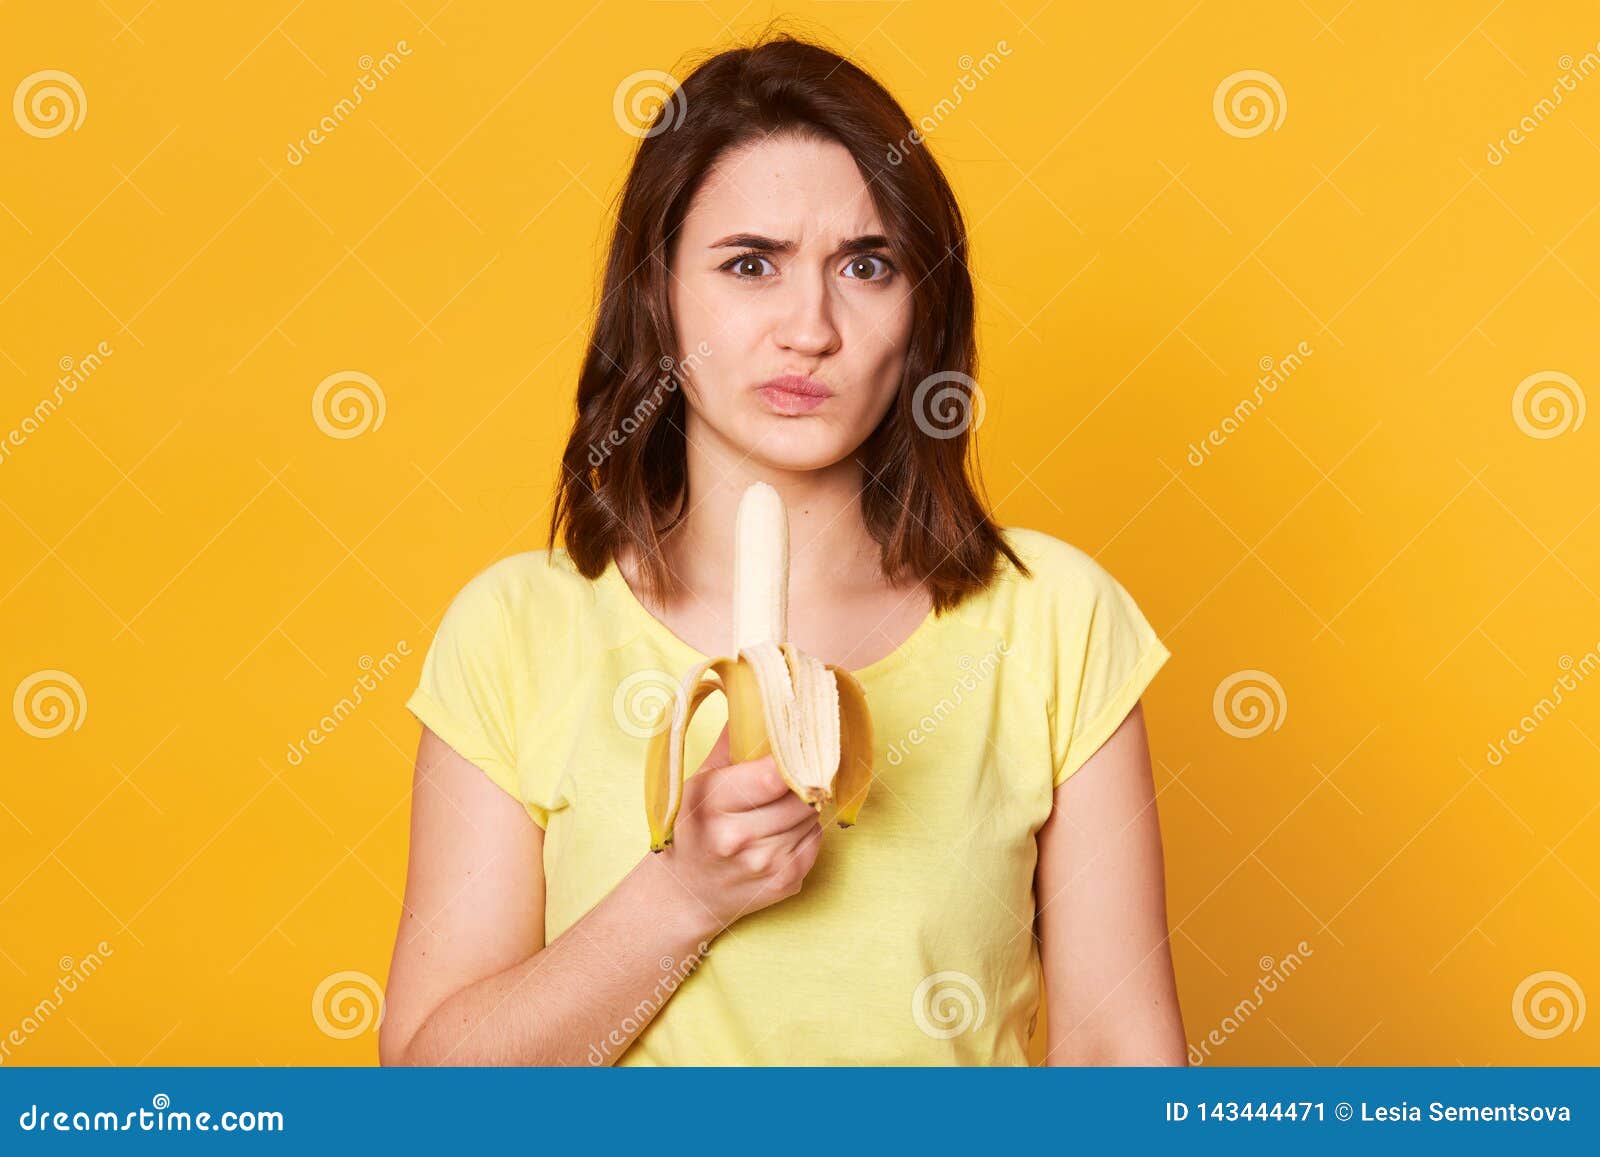 photo of pleasant looking woman in casual clothes, ready for eating fresh banana, does not like this fruit, has unpleasent facial